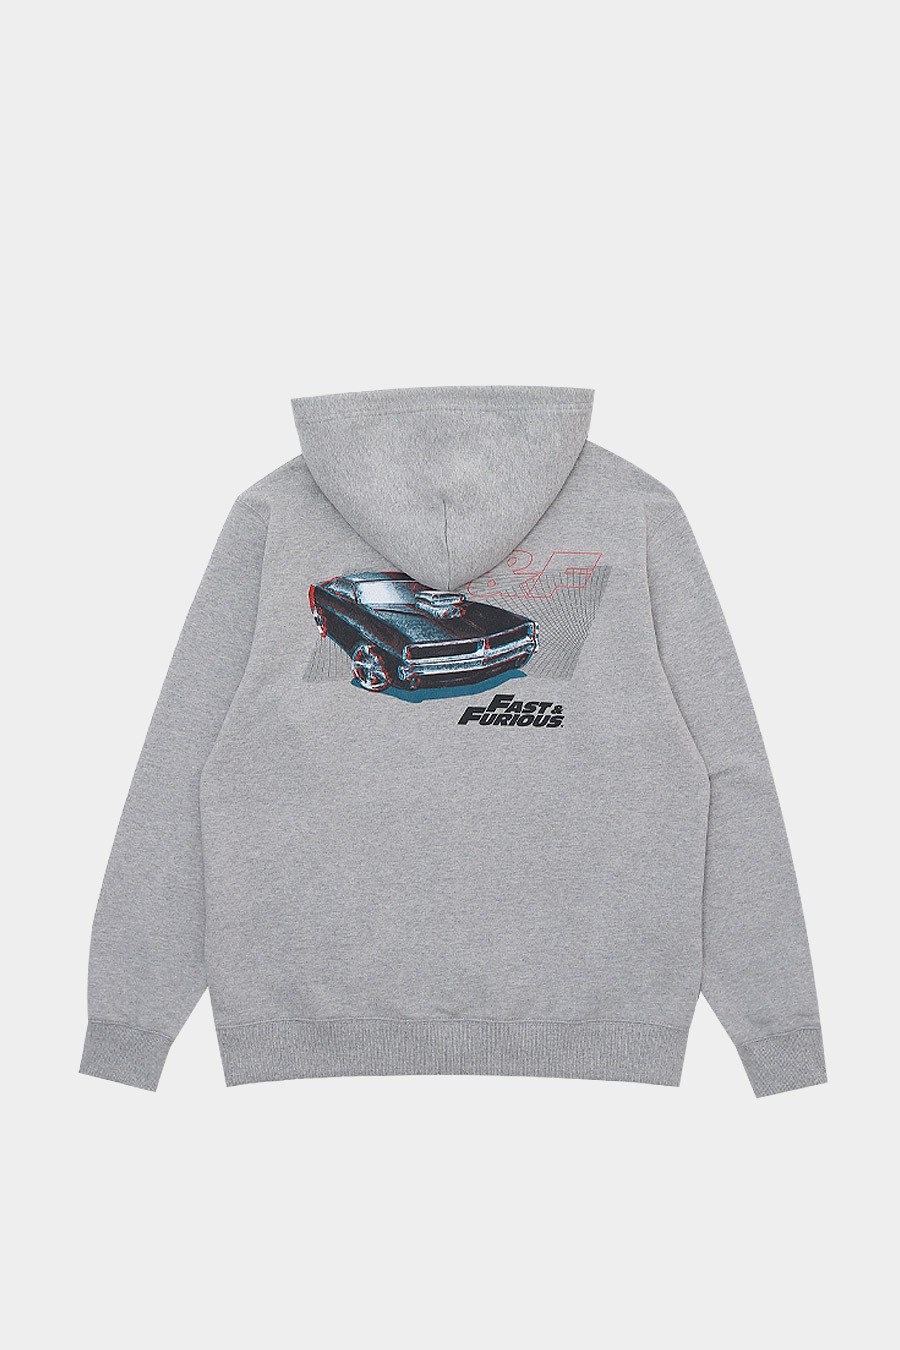 FF9 Grapic Hoodie GRAY  (CP1SMKT302GR)